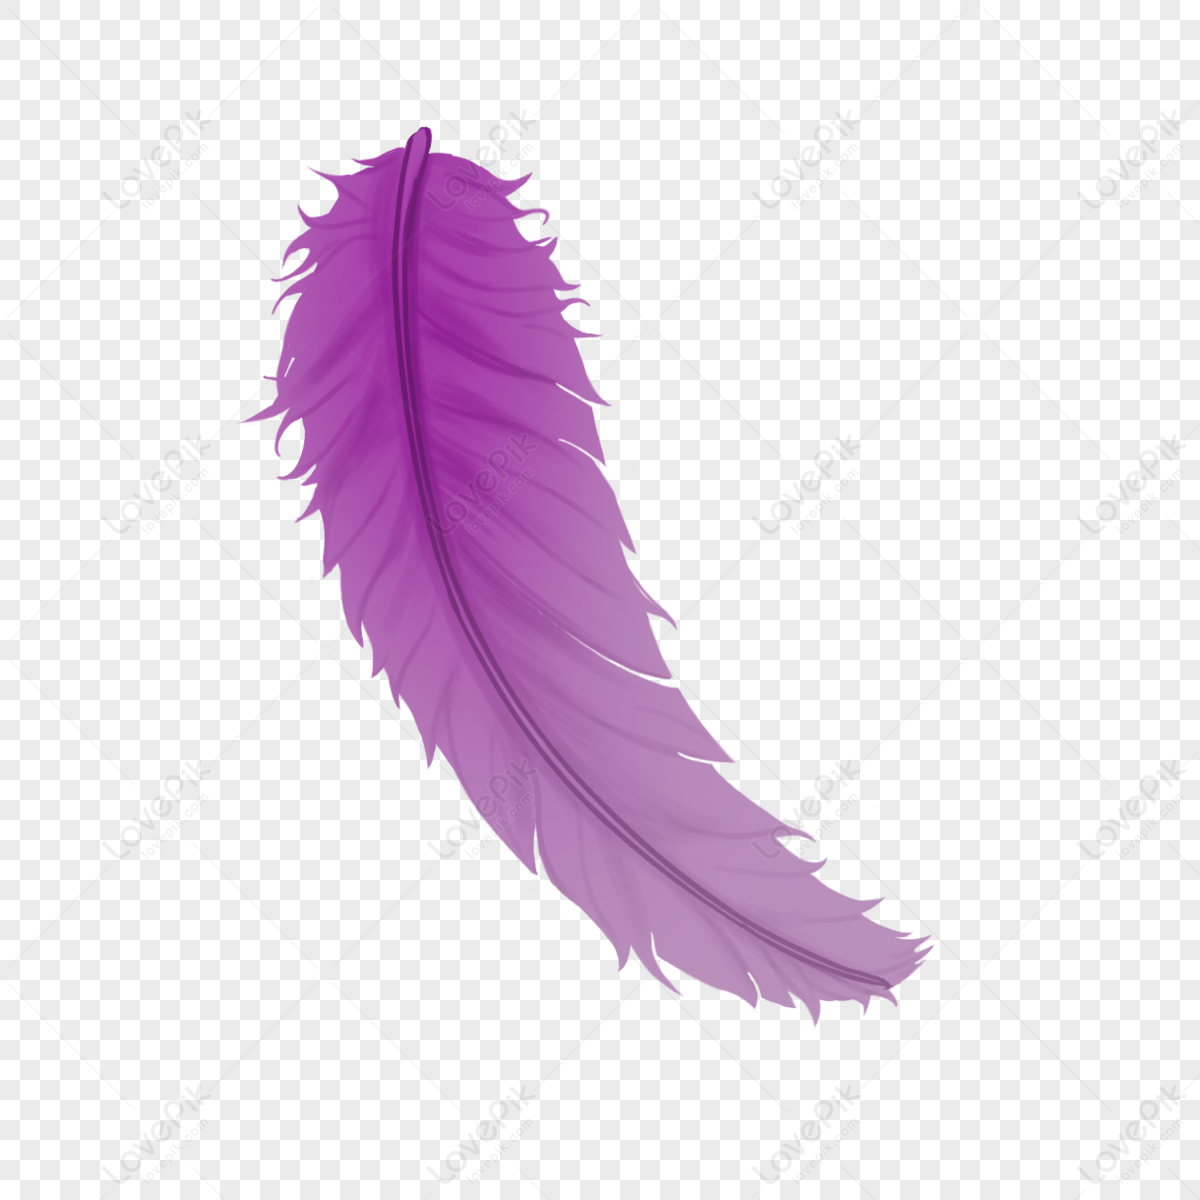 Anime Feathers Black And White Clipart Images For Free Download - Pngtree